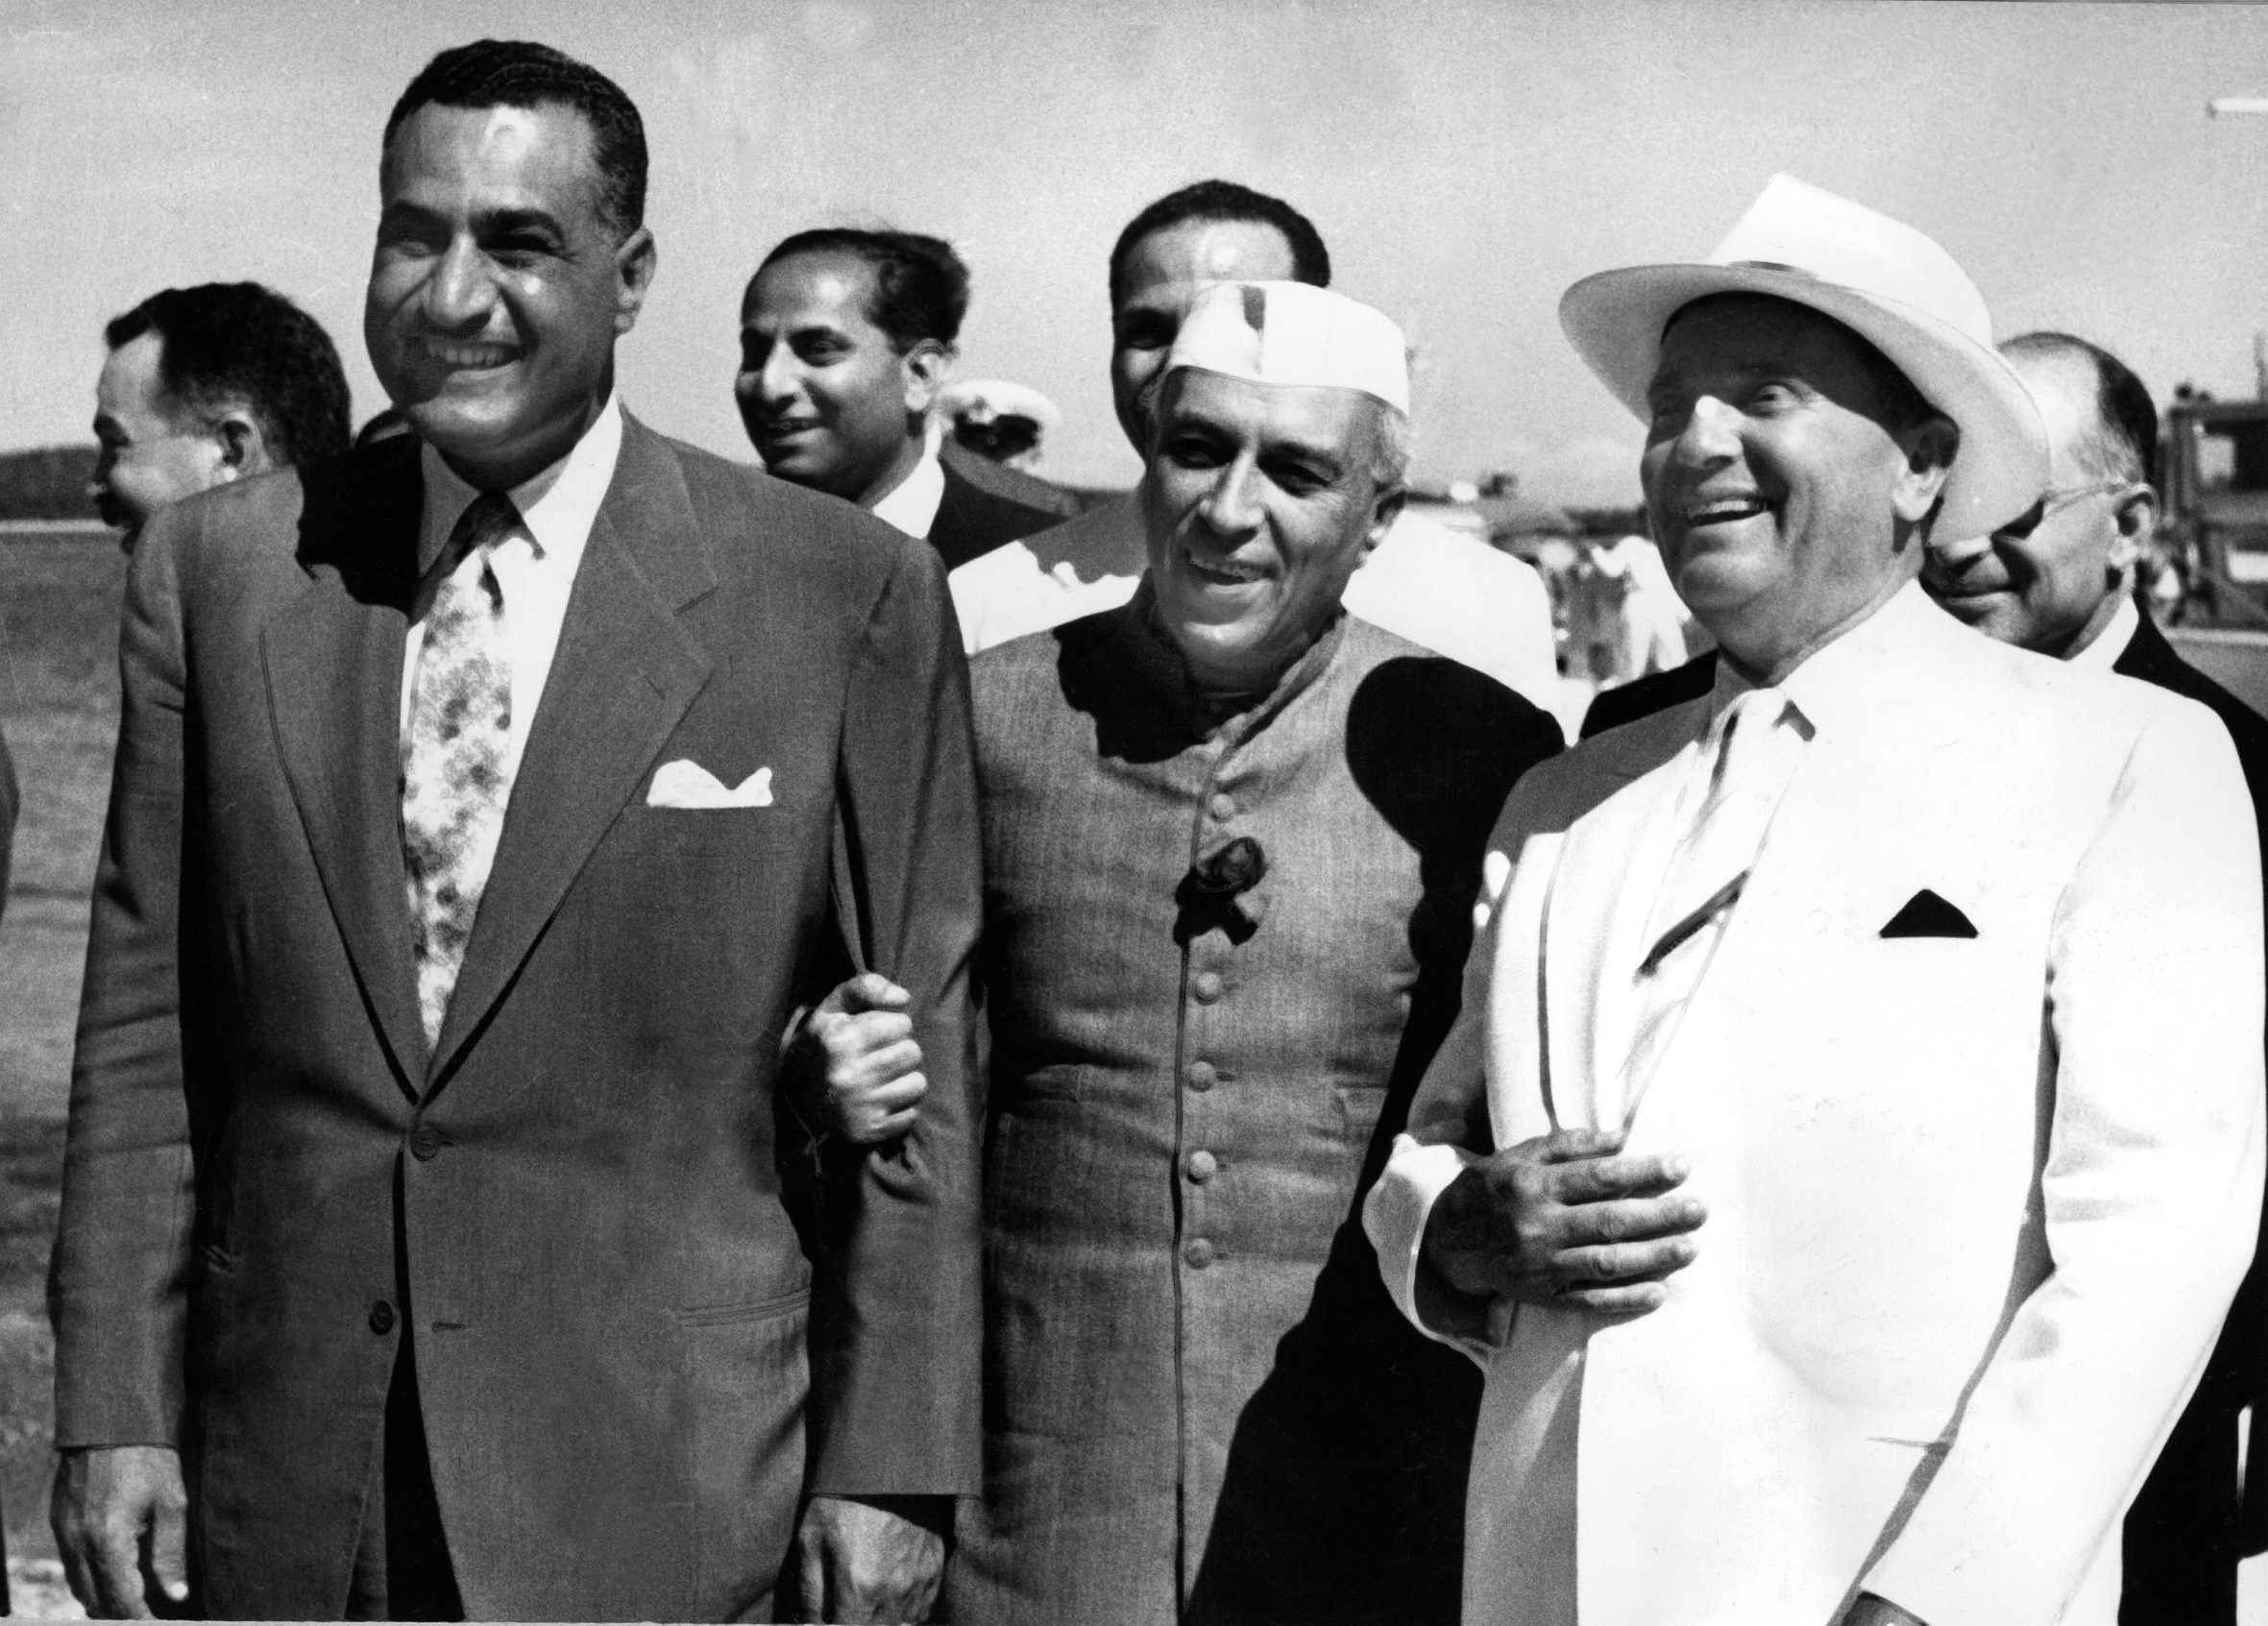 (FILES) In this file photo taken in July 1956 Yugoslav President Marshal Josip Broz, better known as Tito (R, 1892-1980) shares joke with Egyptian President Gamal Abdel Nasser (L) and Indian Prime Minister Jawaharlal Nehru (C) at Brioni Island during a Non-Aligned Movement summit. - Josip Broz Tito, who died 40 years ago at the age of 88, was both revered and feared as the lifelong leader of former Yugoslavia, a country that later unravelled without his unifying presence. (Photo by - / AFP)